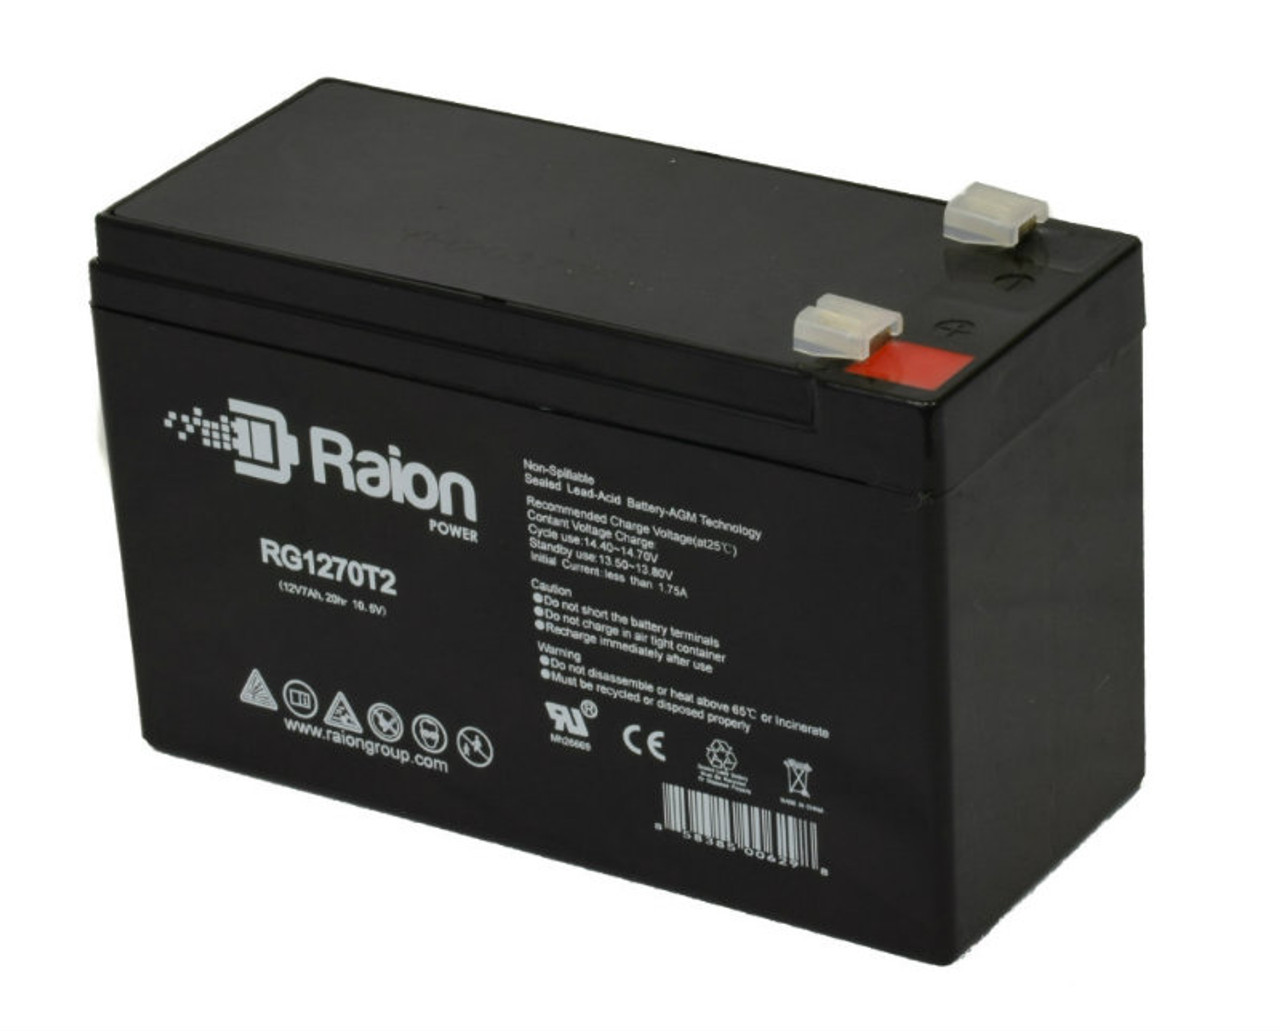 Raion Power Replacement 12V 7Ah RG1270T1 Fire Alarm Battery for Altronix SMP5PMP8